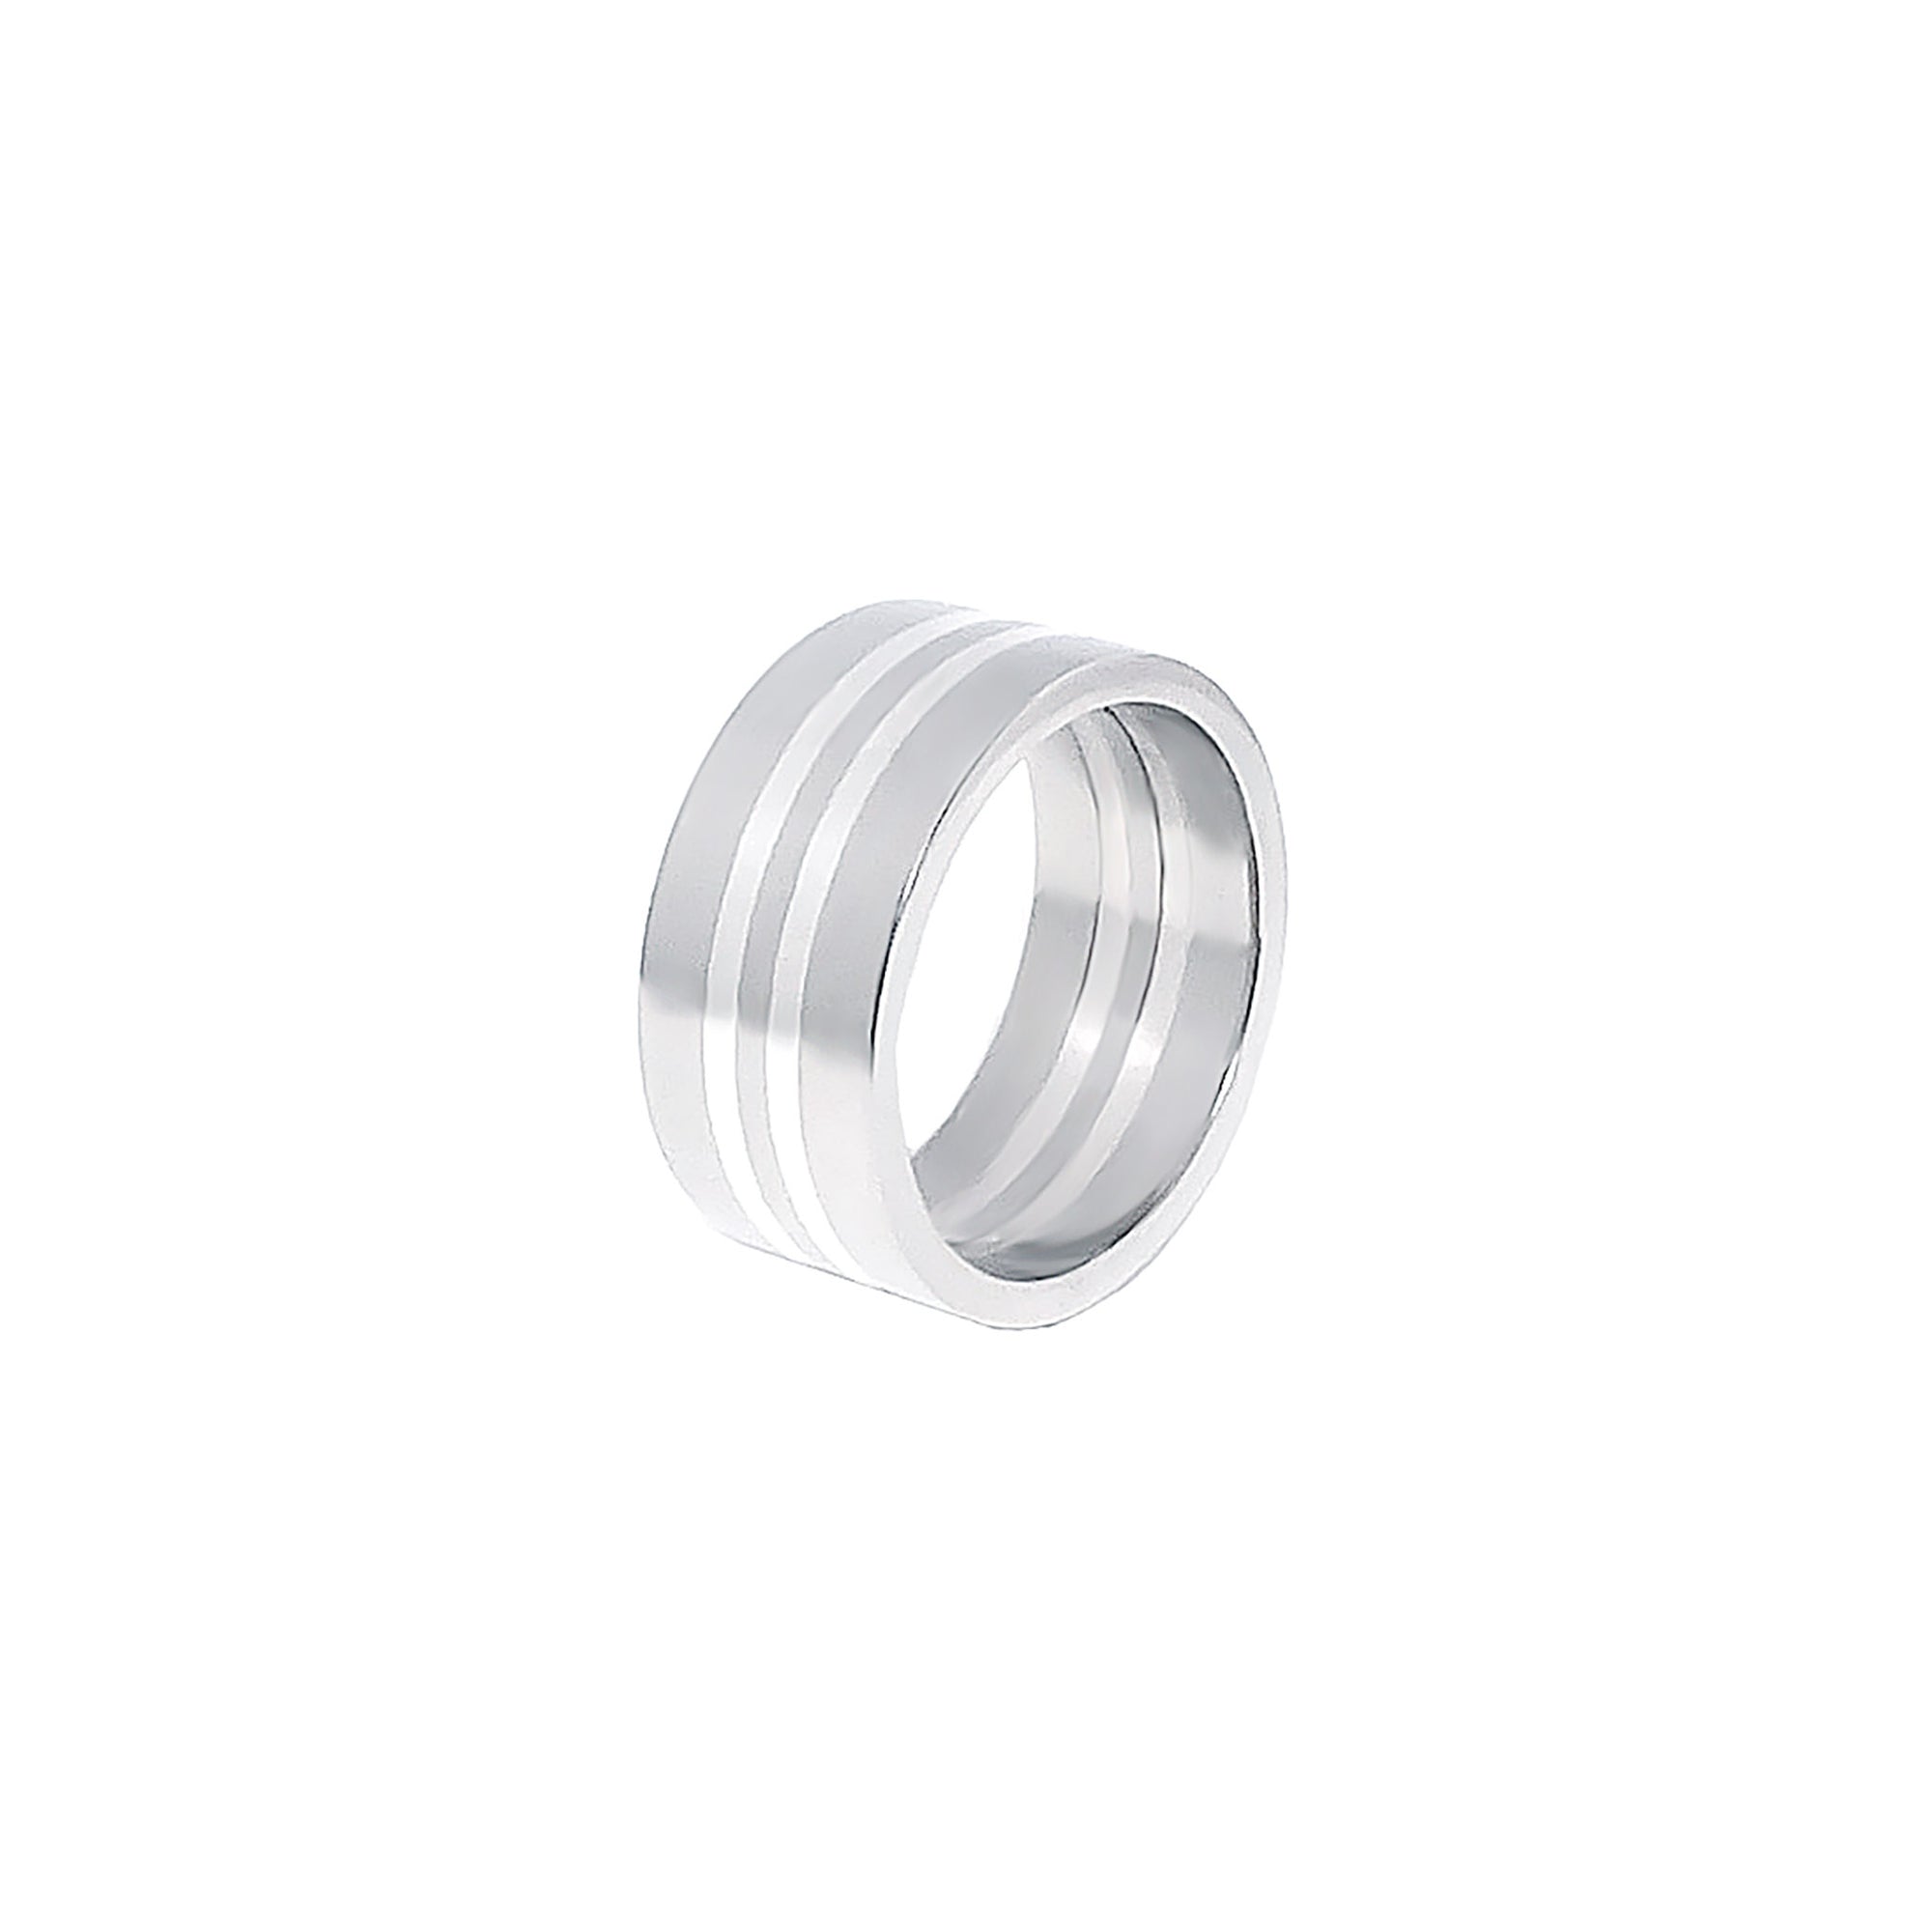 Factura-IV Round Fusion Ring AG292